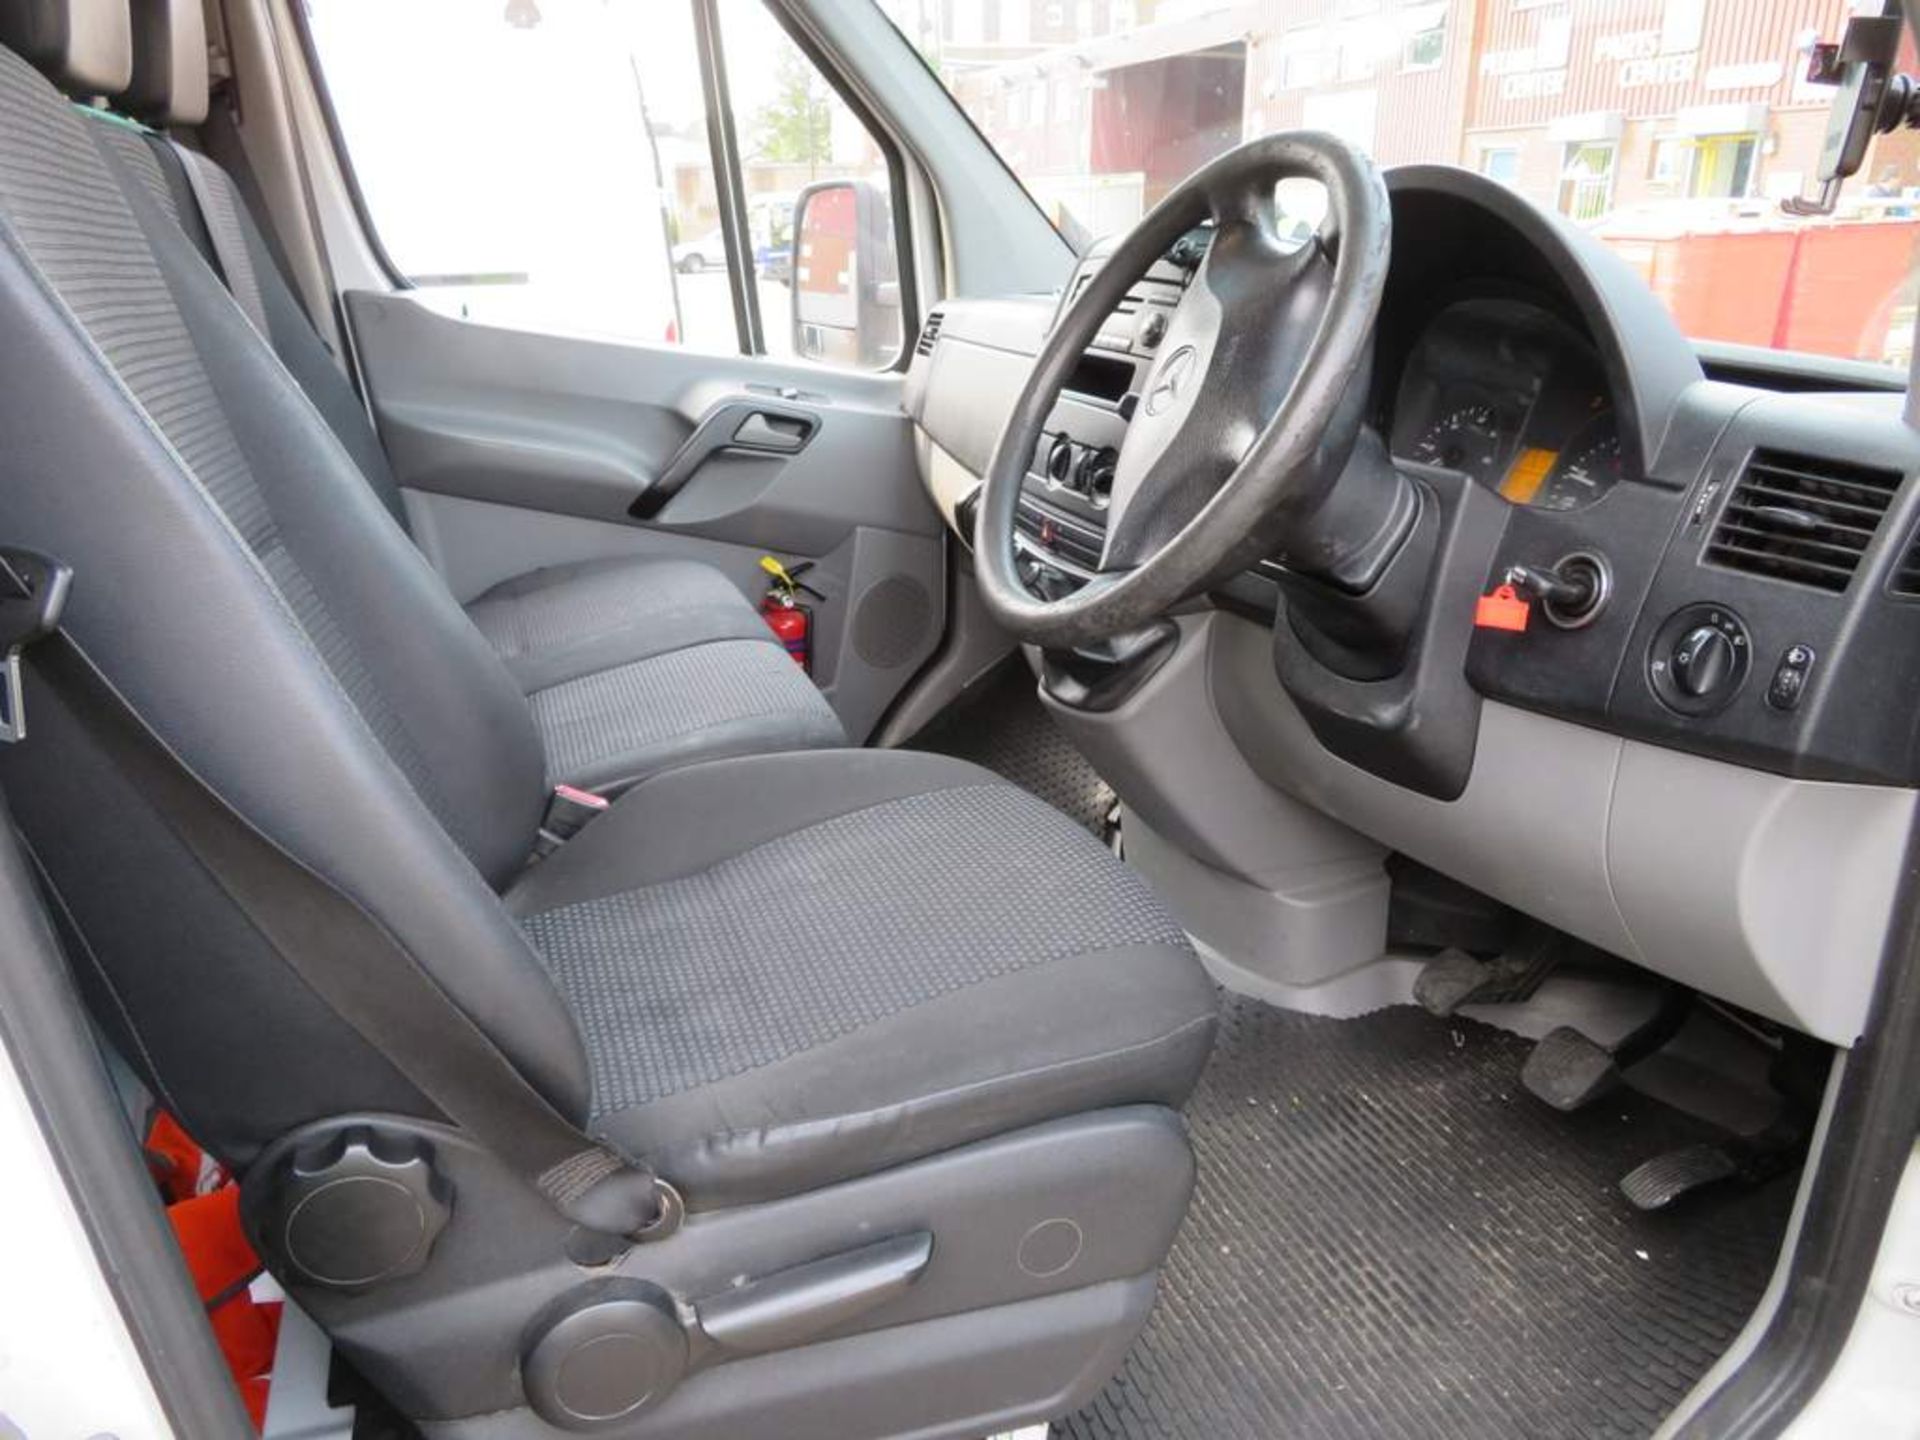 2007 Mercedes Sprinter 311 Luton Van. Fitted with a Slim Jim 500kg taillift - Image 7 of 18